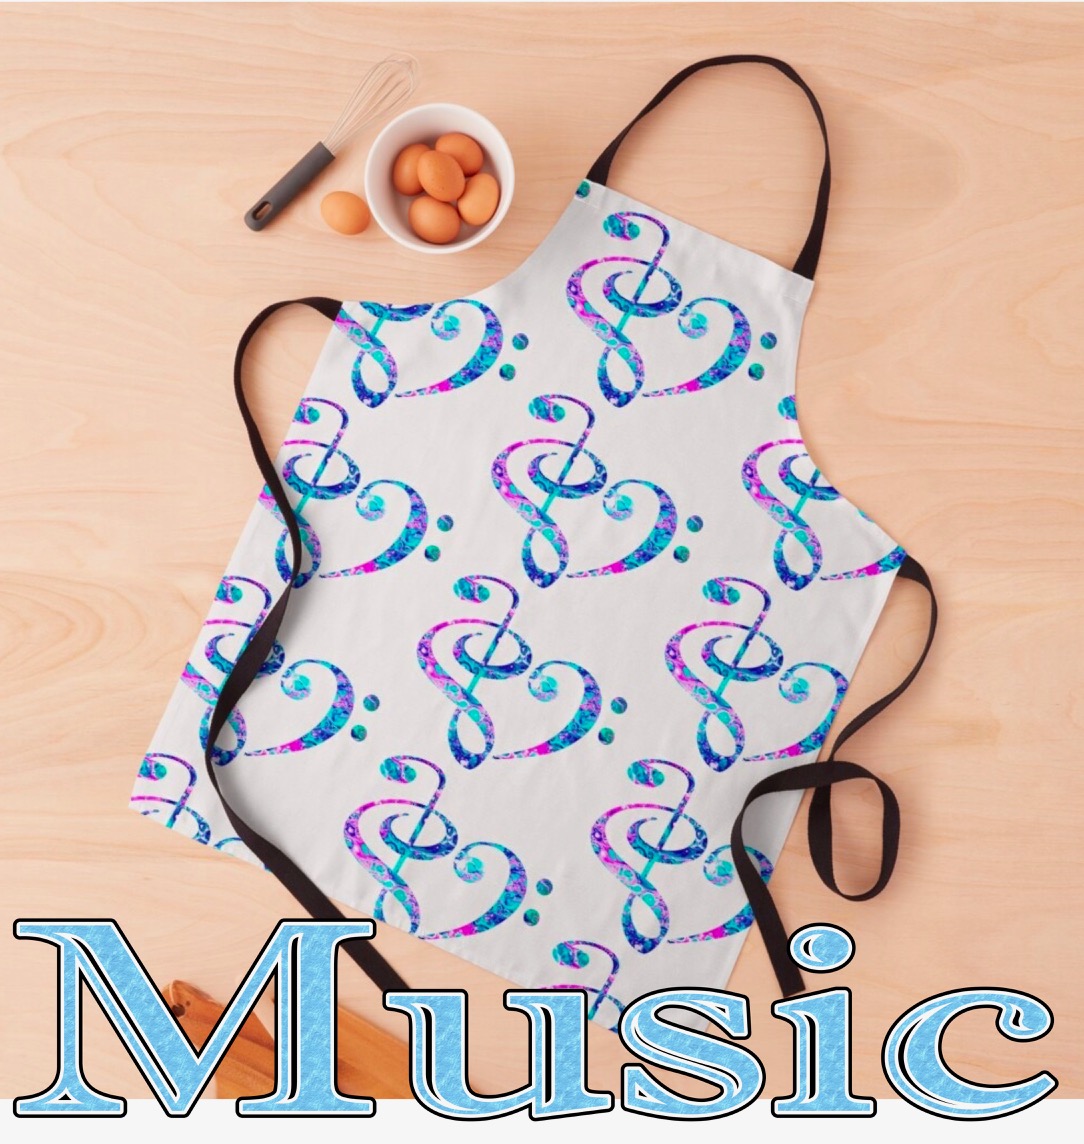 Music Lovers! You can find this cool apron in our Redbubble shop! redbubble.com/i/apron/Music-… #Redbubble